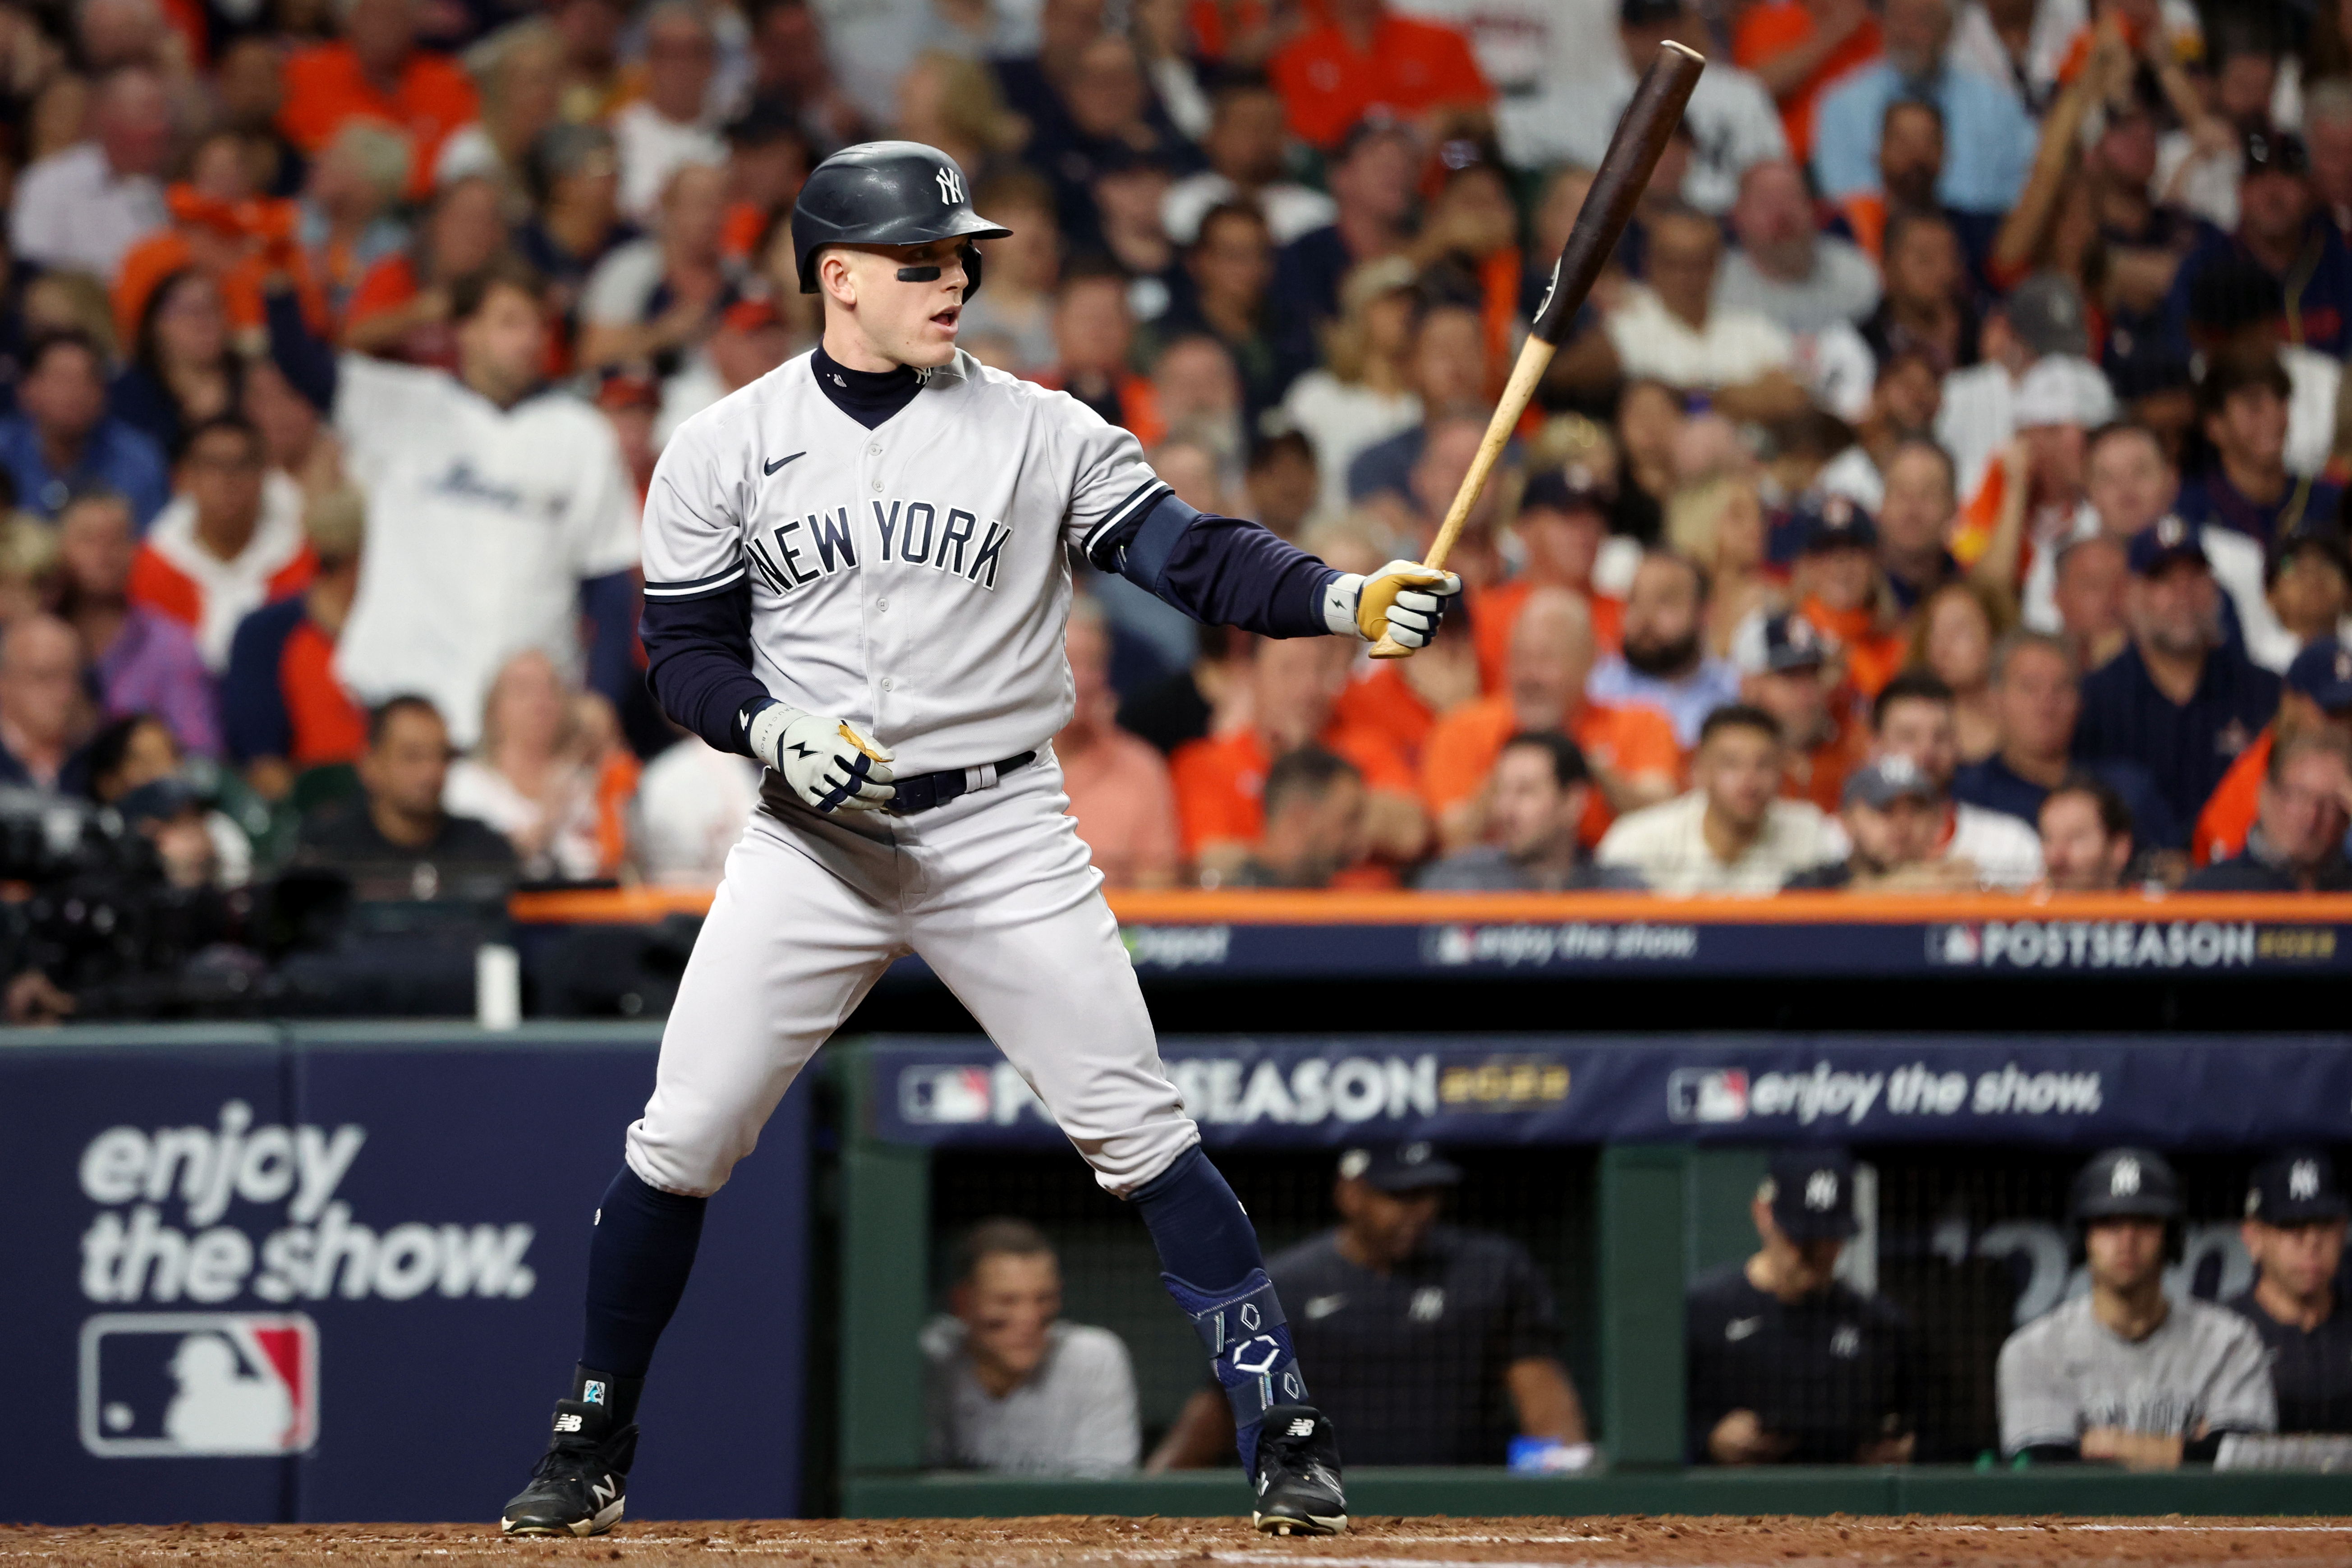 Harrison Bader's 5th homer of the postseason gives the Yankees the